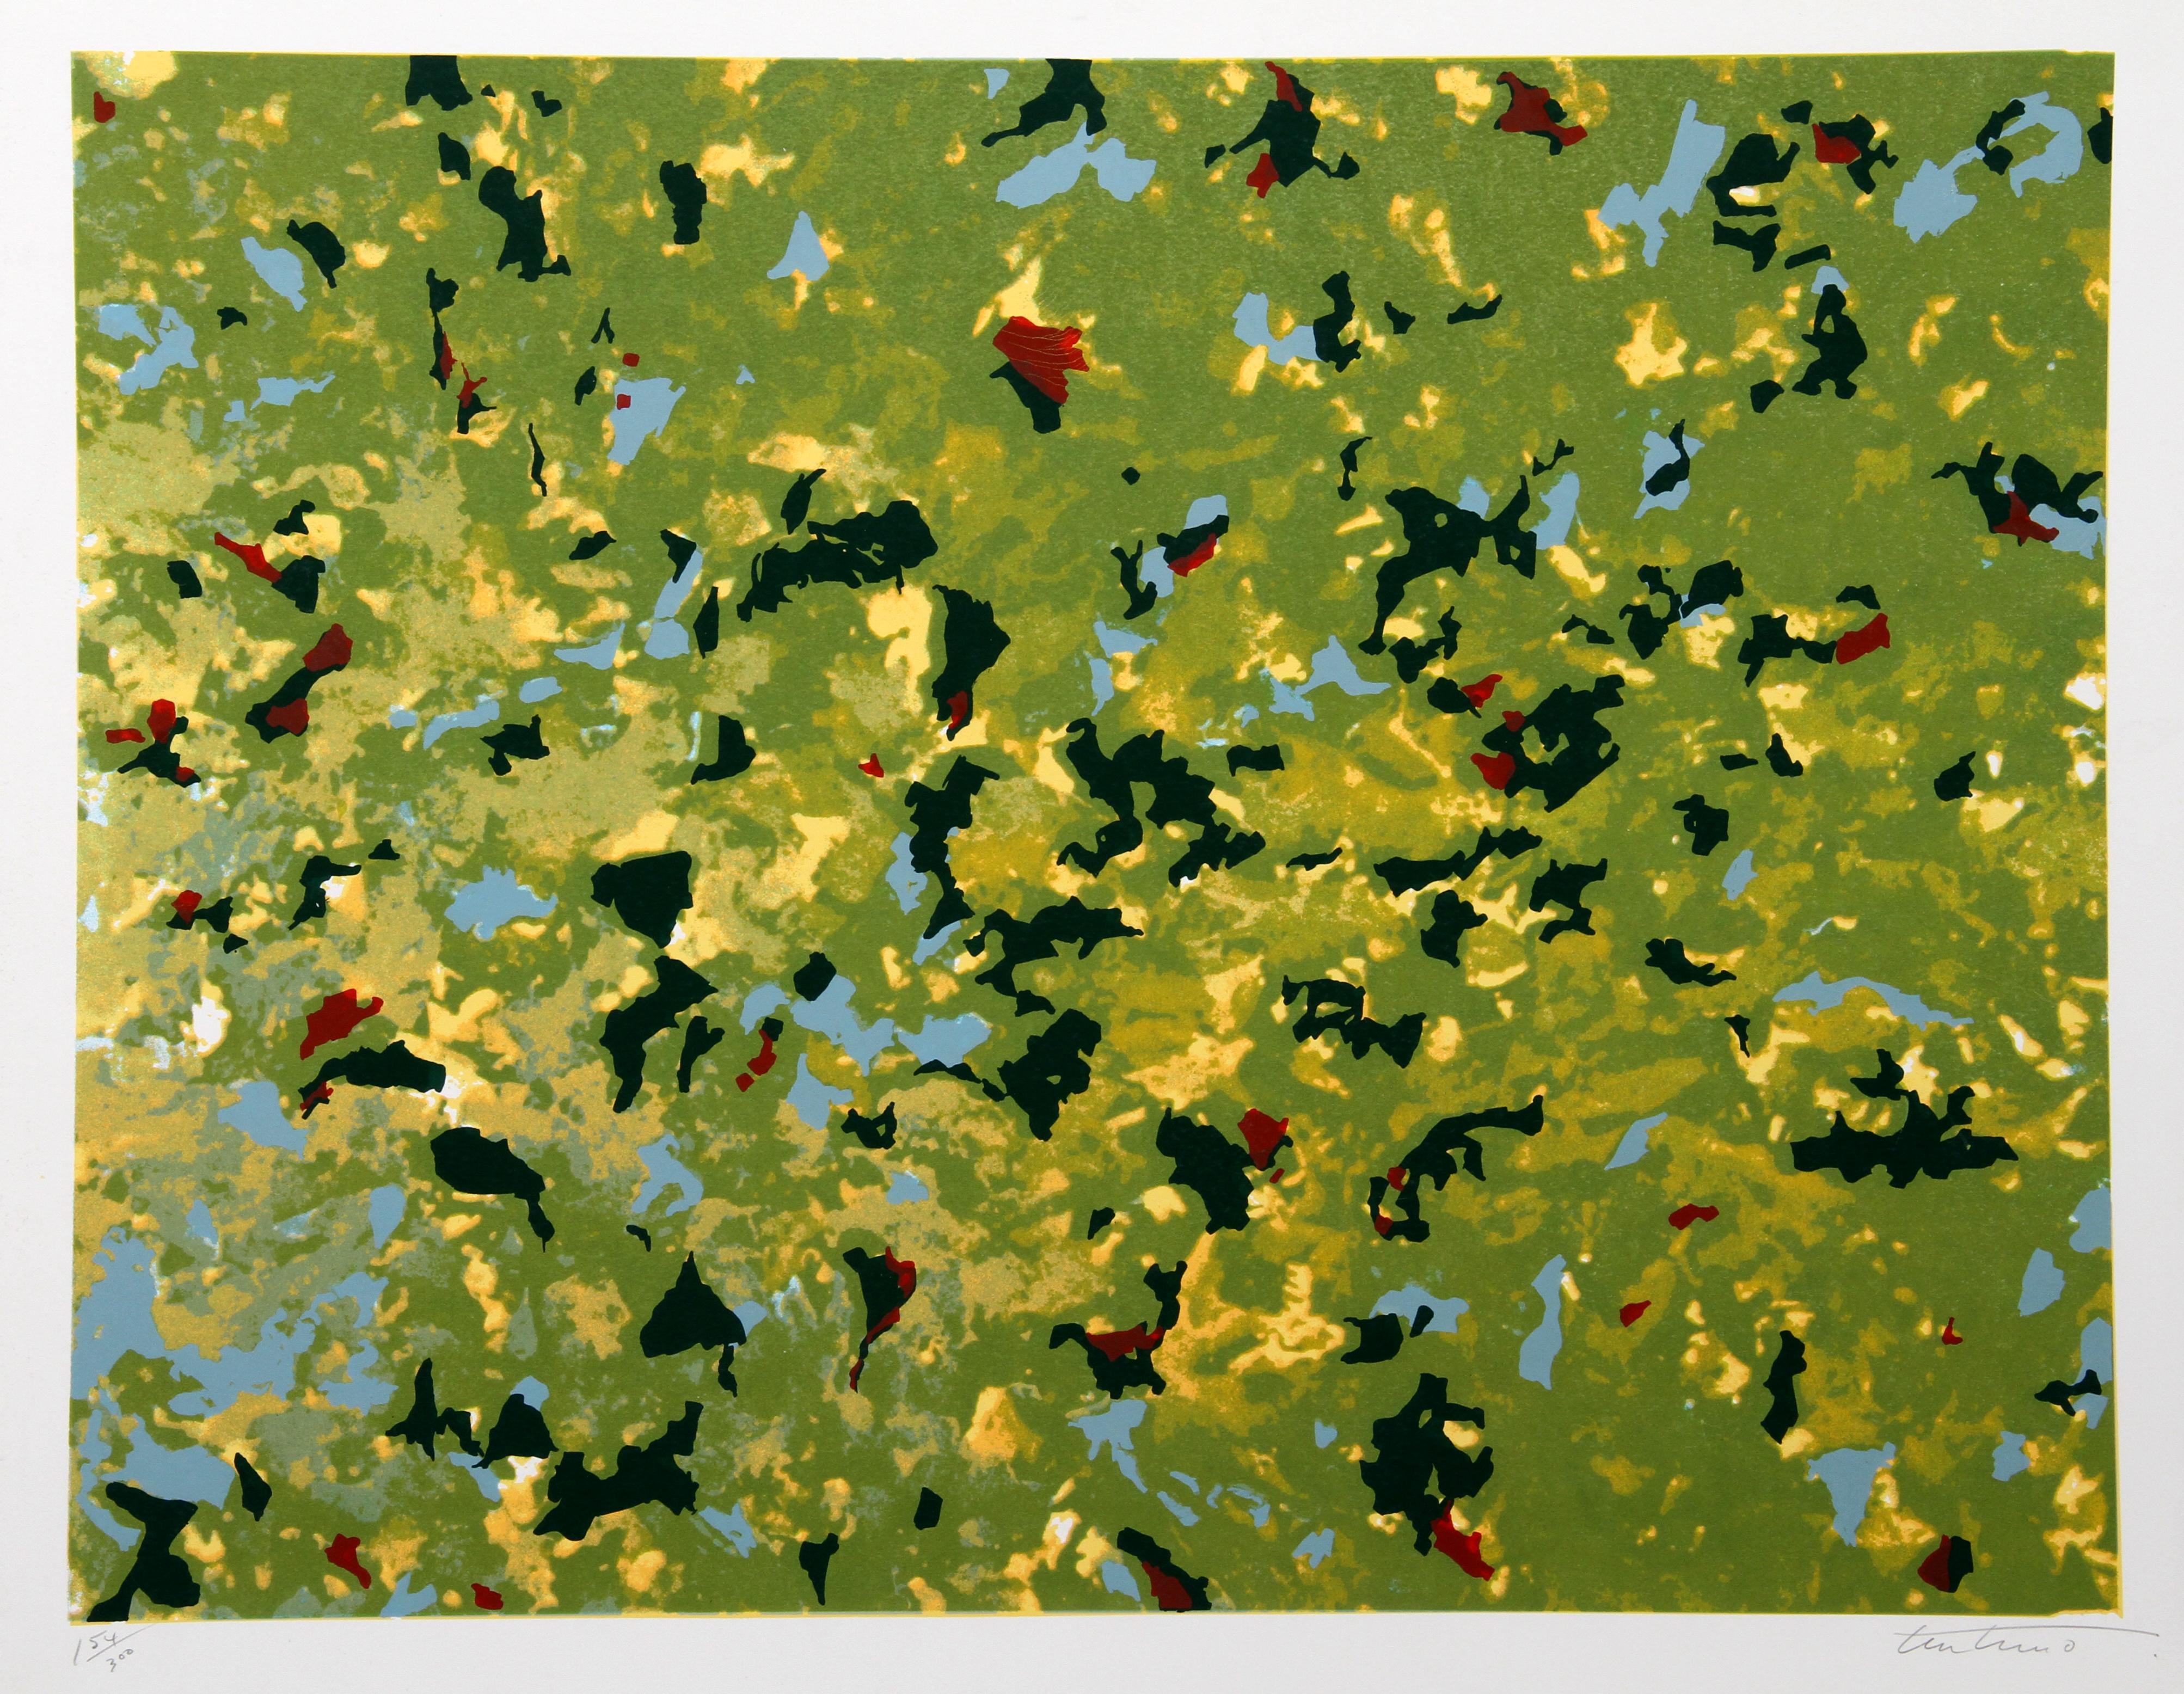 Artist: Domenick Turturro, Italian/American (1936 - 2002)
Title: Fern Hills
Year: 1980
Medium: Serigraph, signed and numbered in pencil
Edition: 300
Image Size: 23 x 30 inches
Size: 26 in. x 32.5 in. (66.04 cm x 82.55 cm)